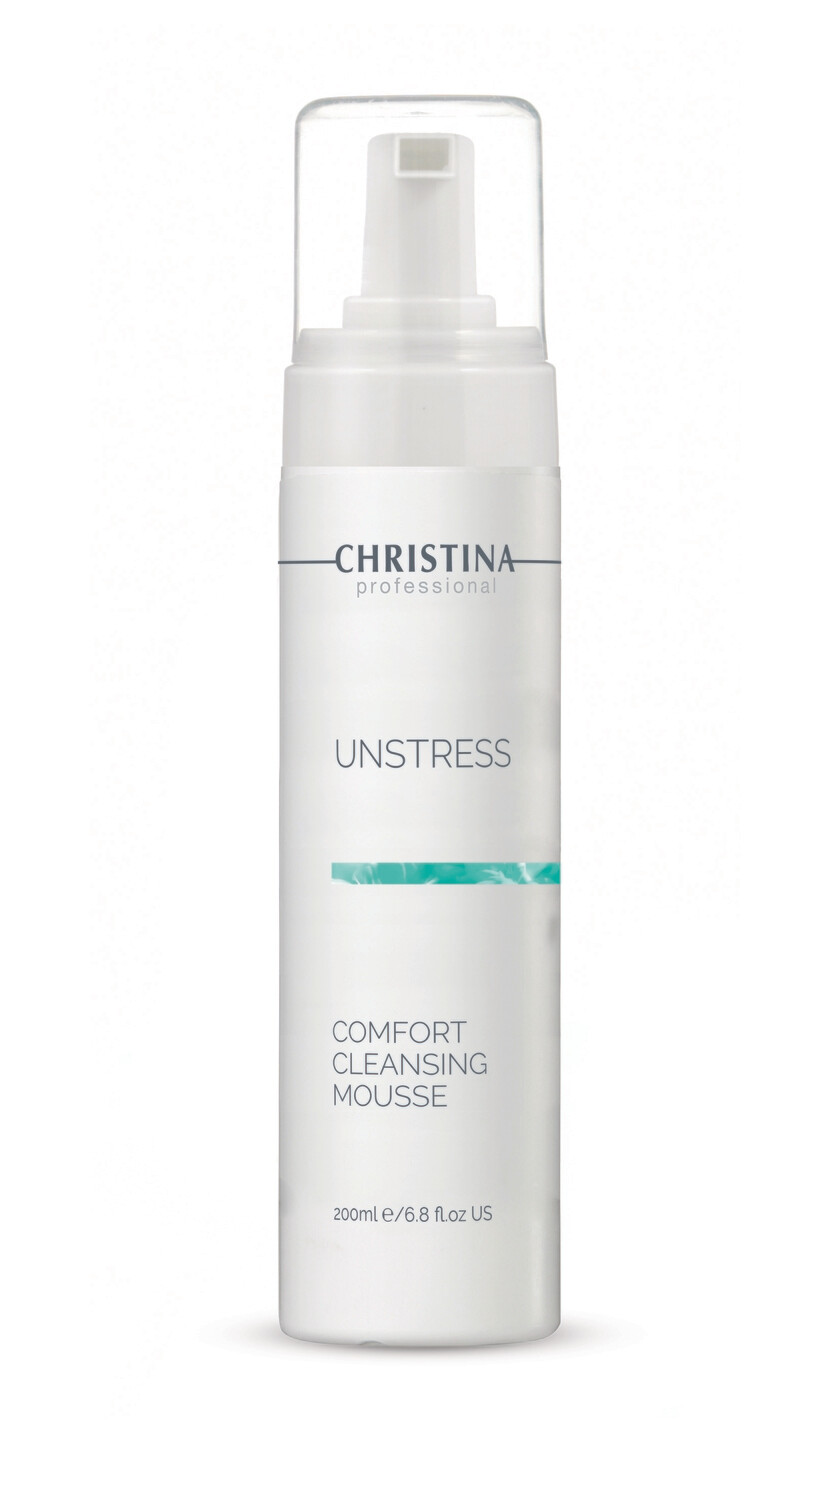 Comfort cleansing mousse 200ml